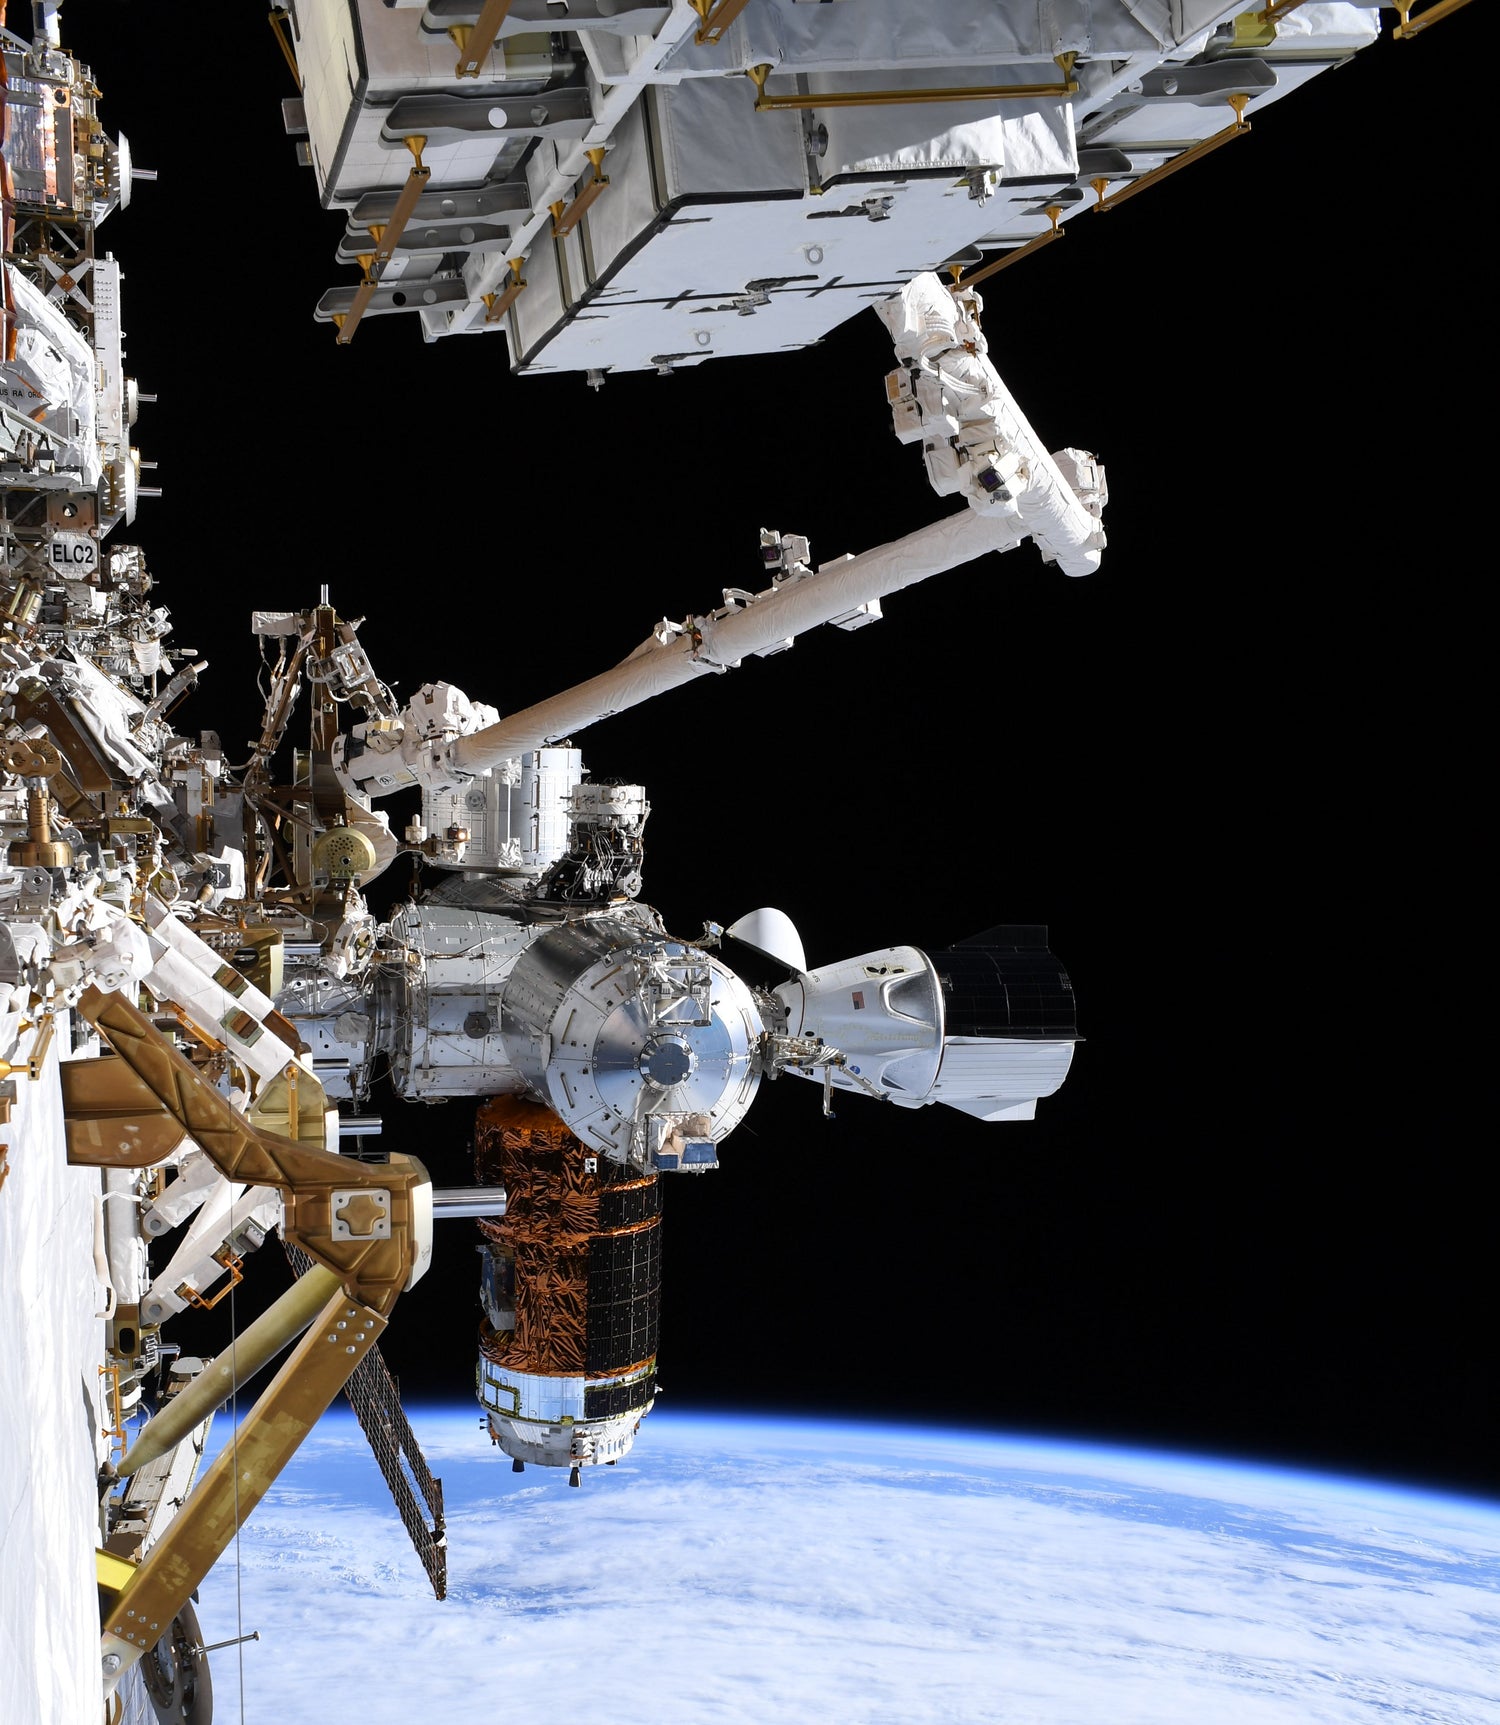 NASA Astronauts share a 'wonderful view' of SpaceX's Crew Dragon during spacewalk